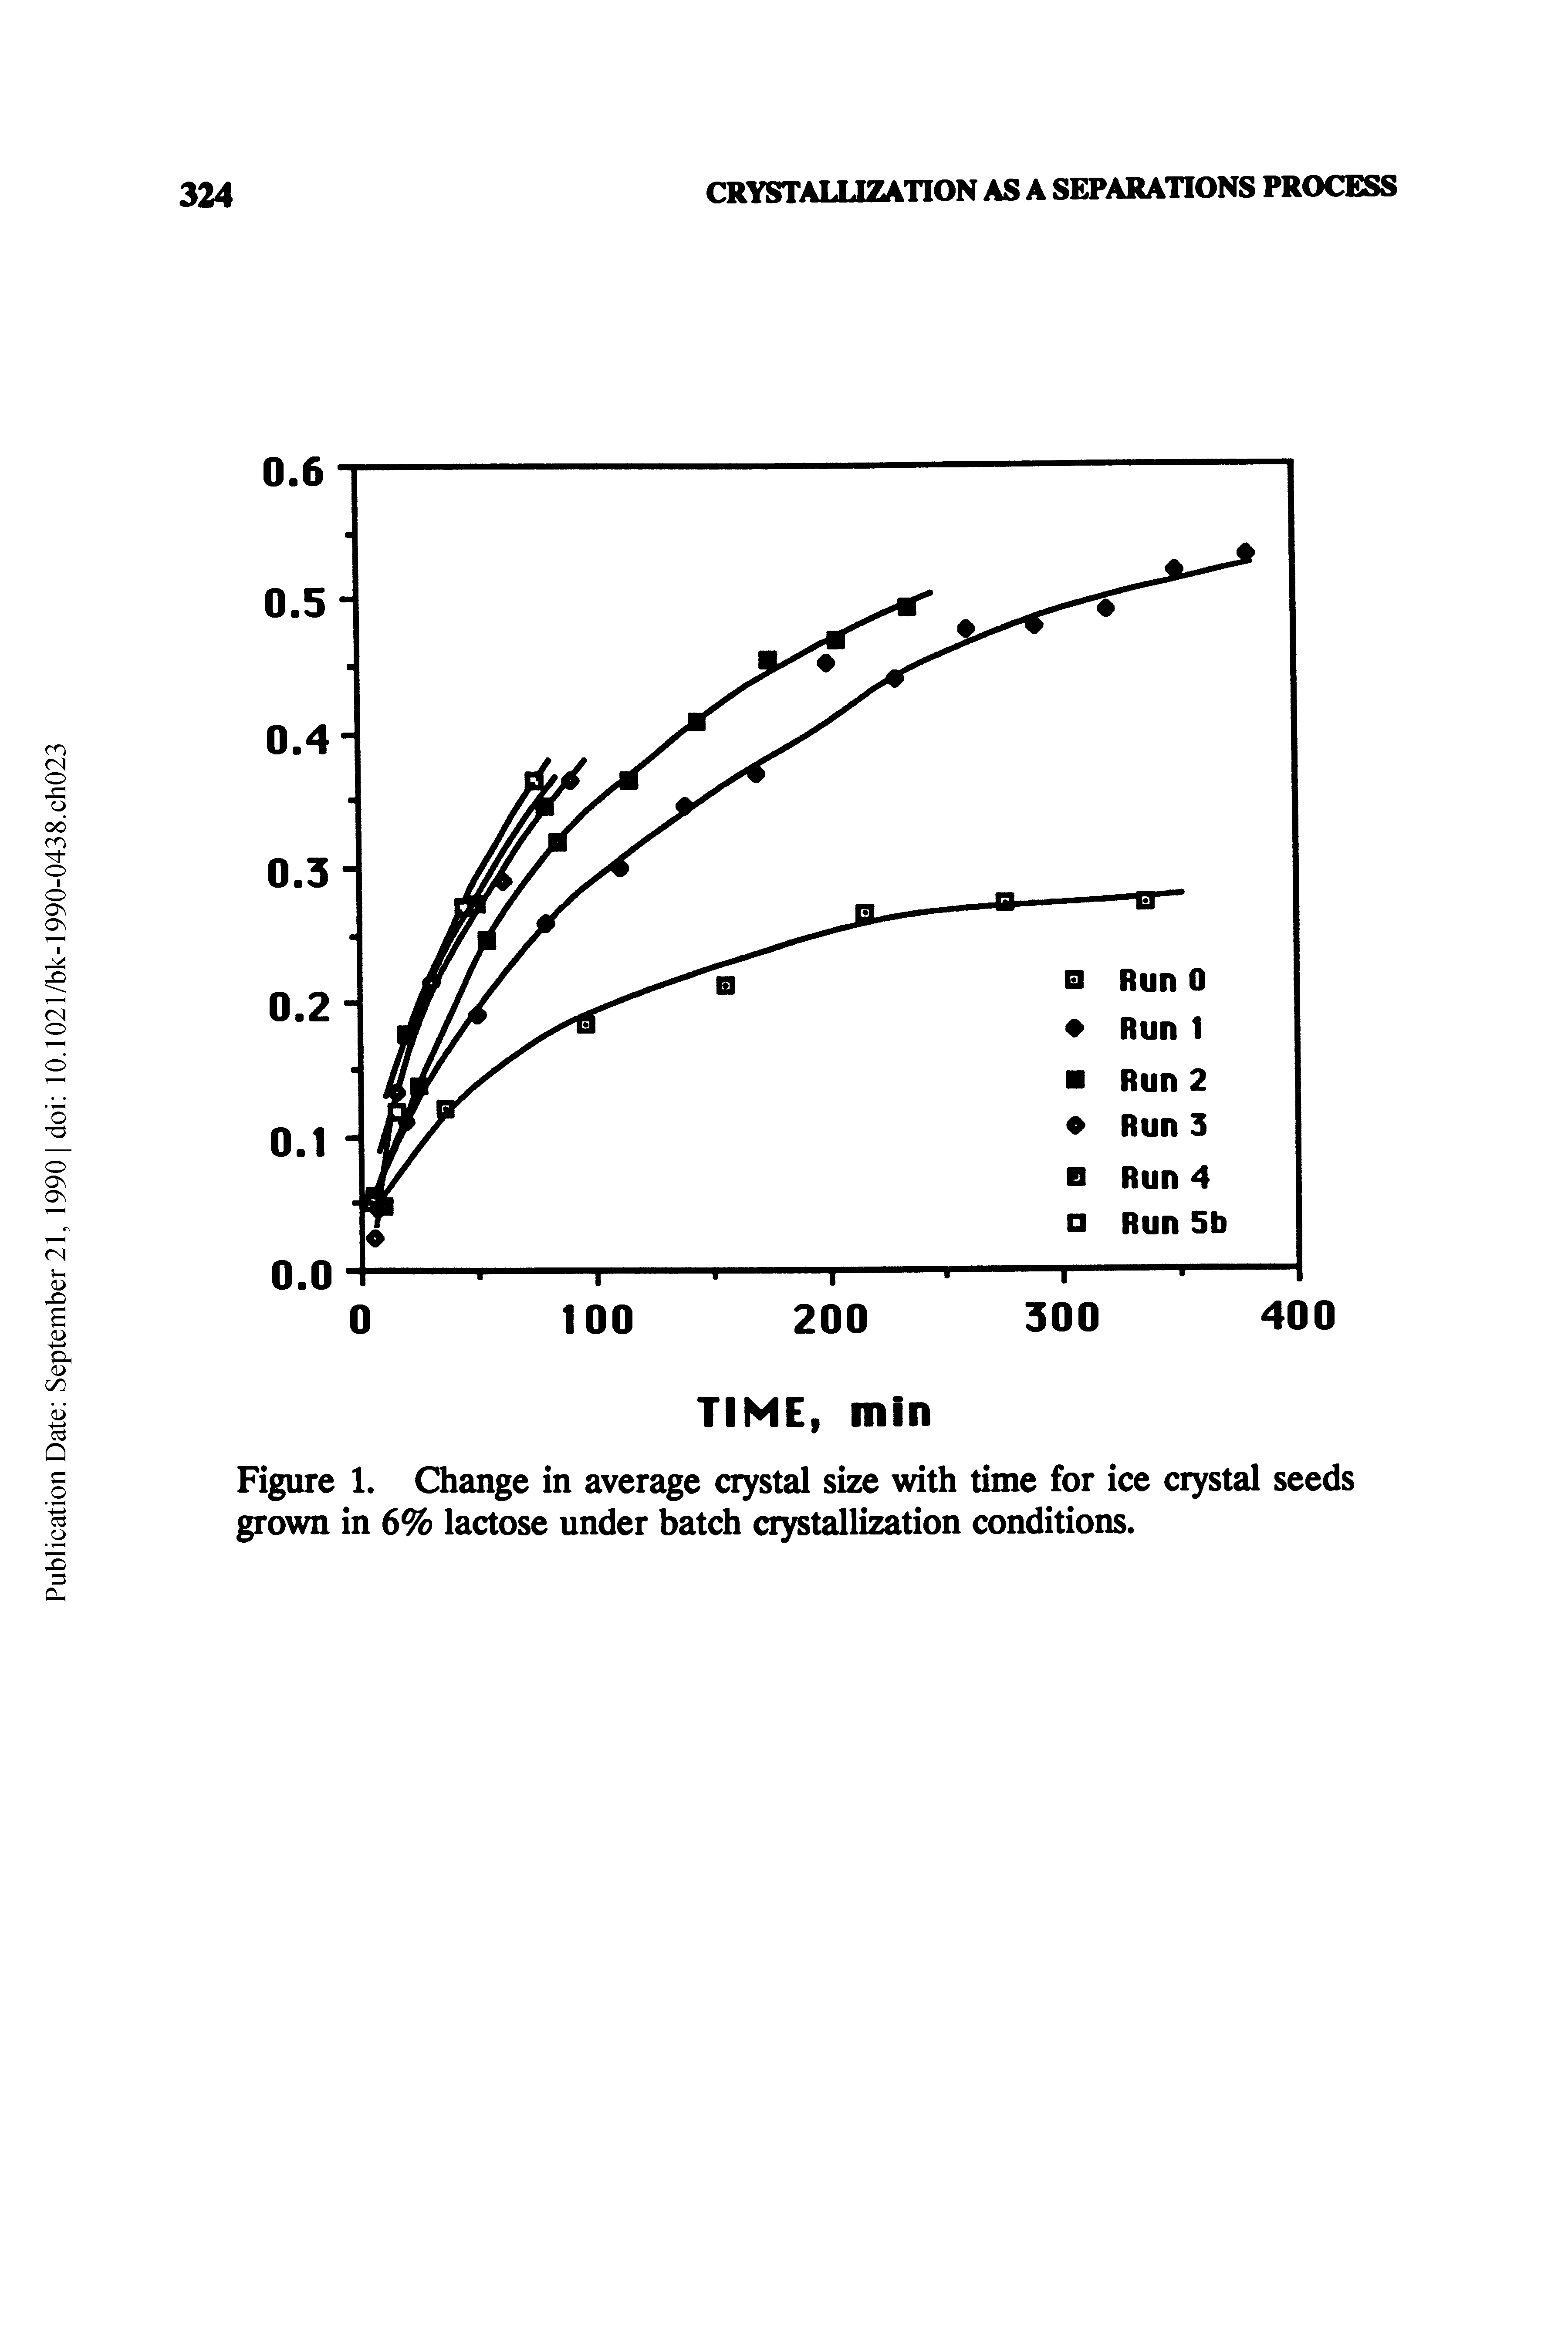 Figure 1. Change in average crystal size with time for ice crystal seeds grown in 6% lactose under batch crystallization conditions.